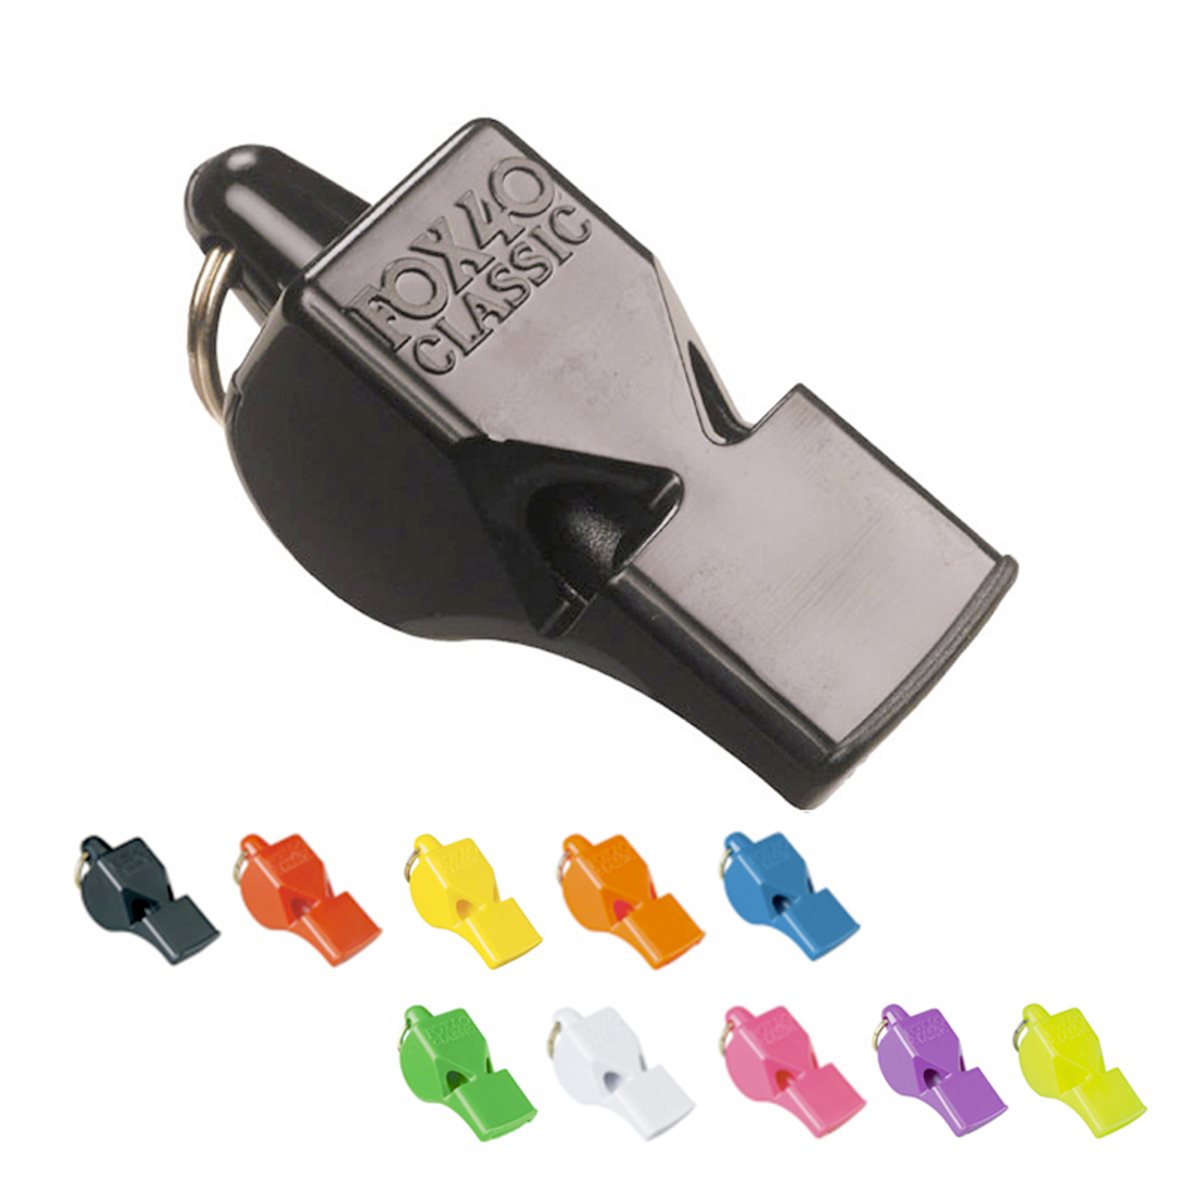 Fox 40 Classic Sports Whistle (RD386)